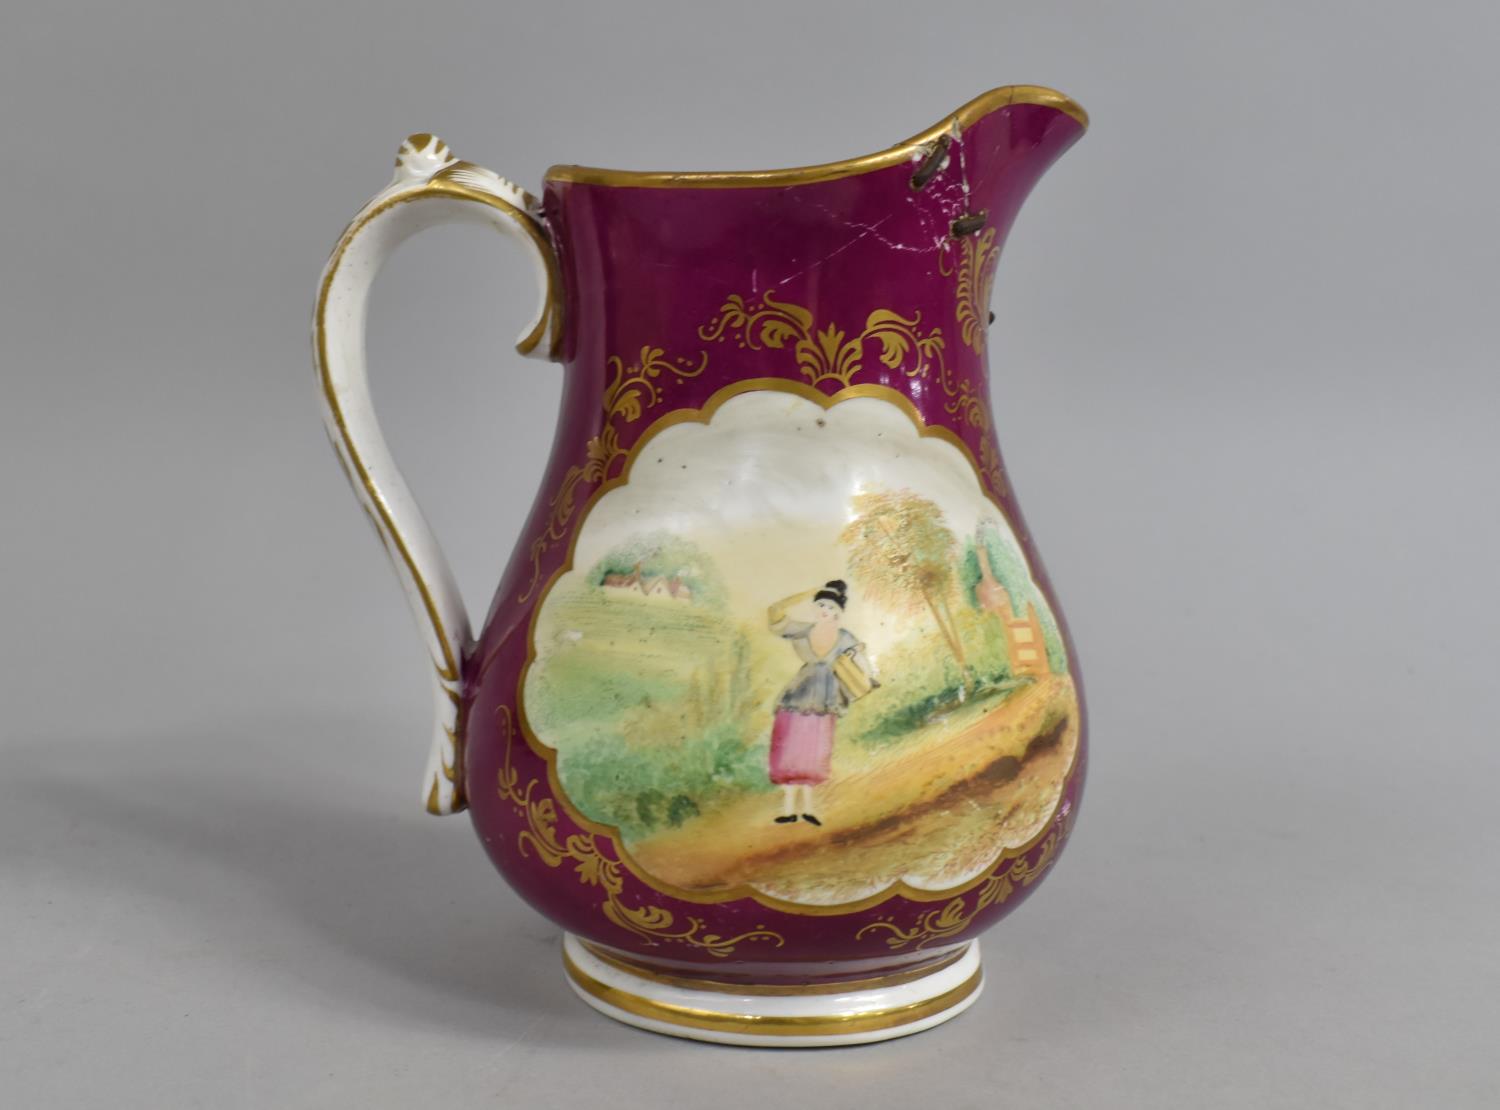 A 19th Century Porcelain Jug with Hand Painted Cartouches on Puce Ground, Inscribed in Gilt James - Image 2 of 5